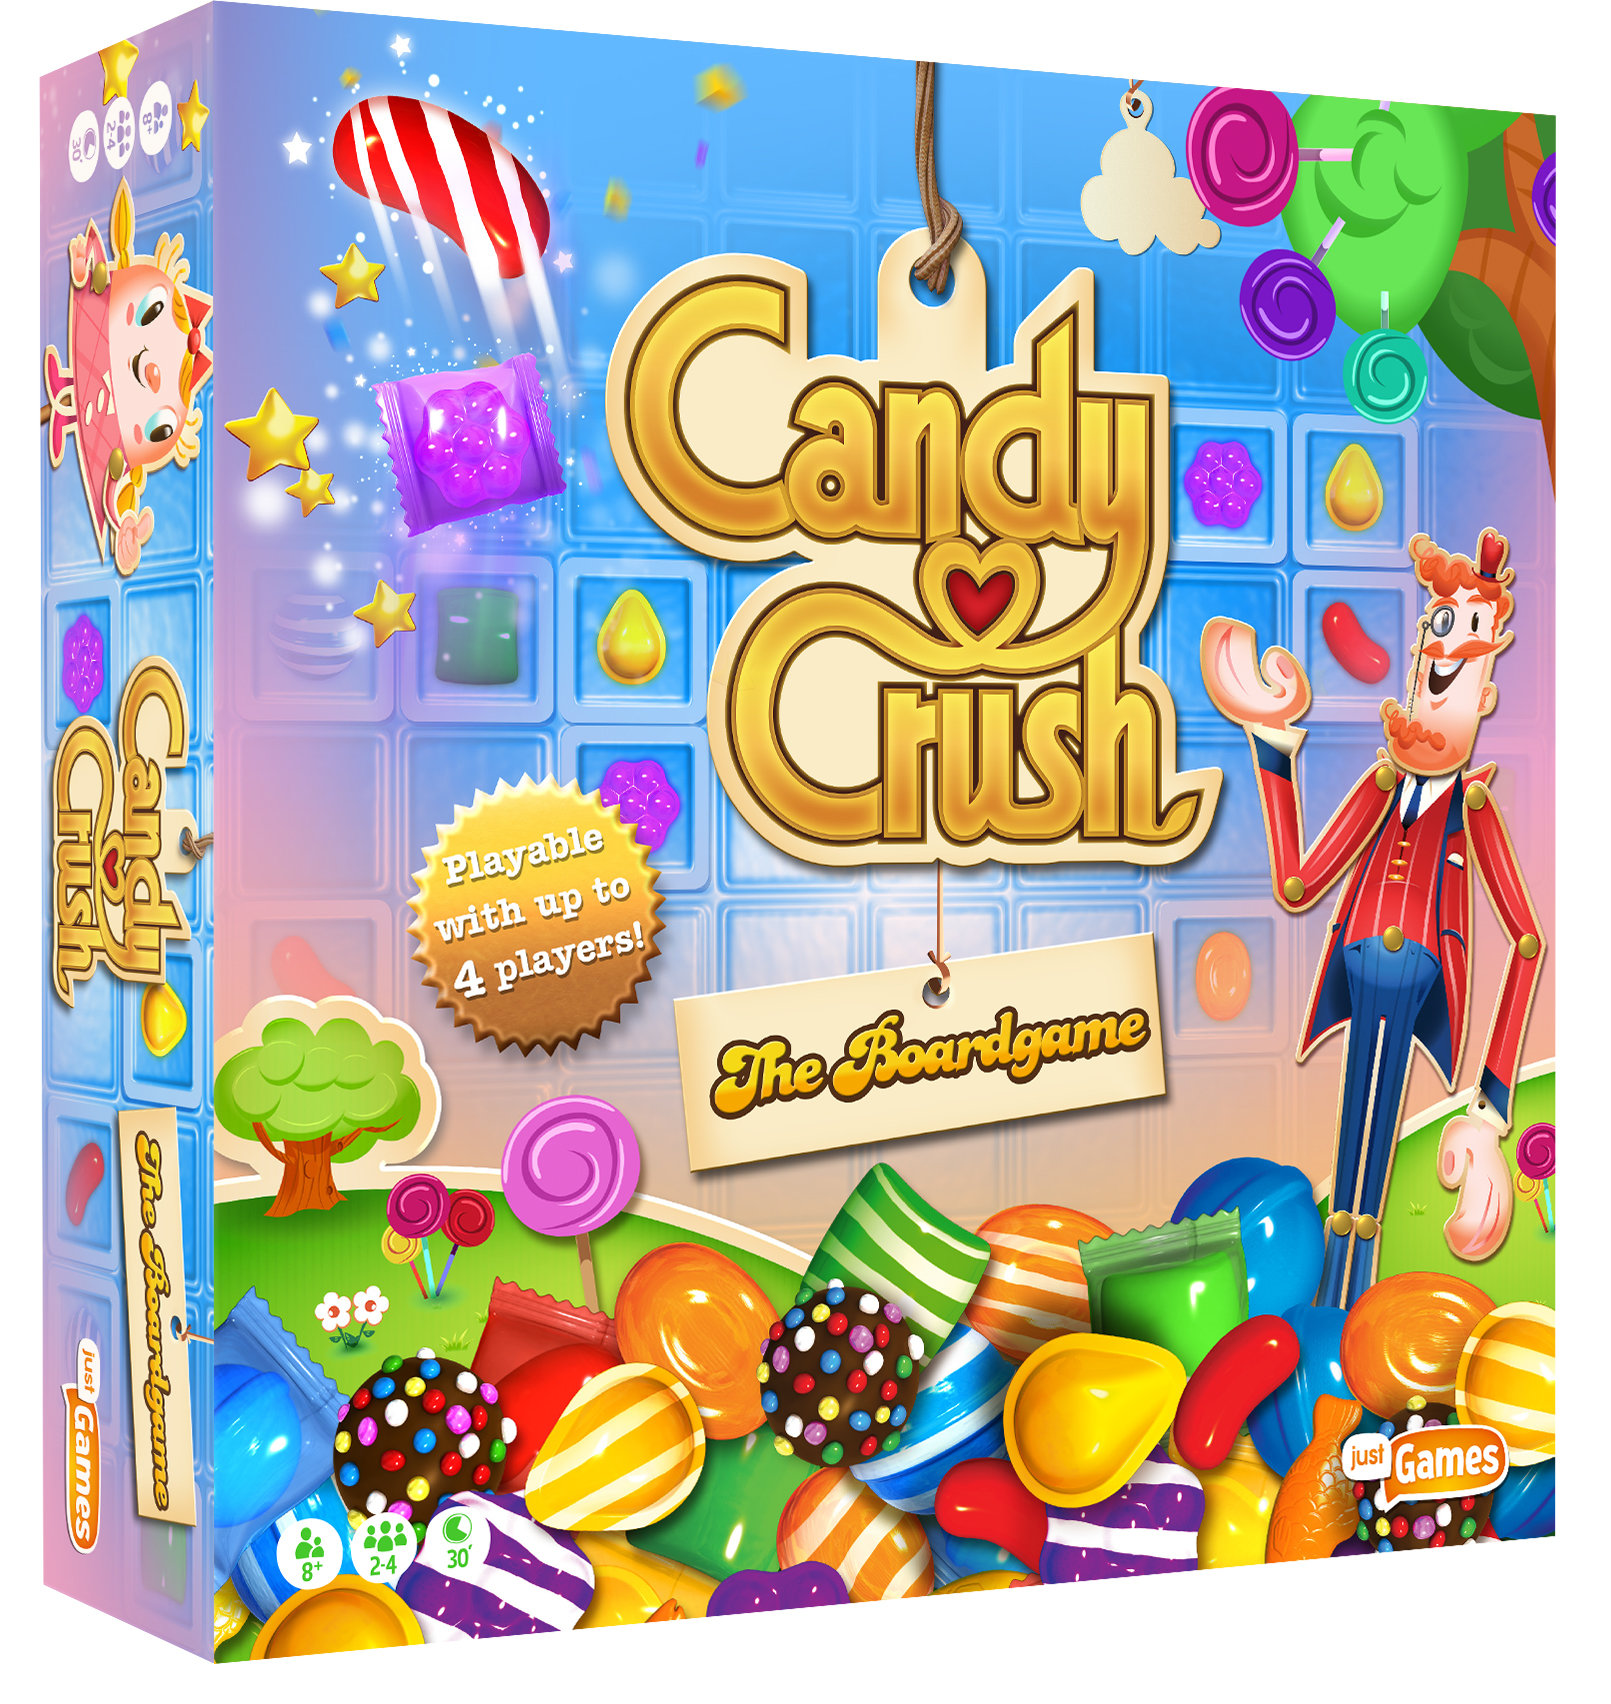 Candy Crush: The Boardgame – Board Game Review